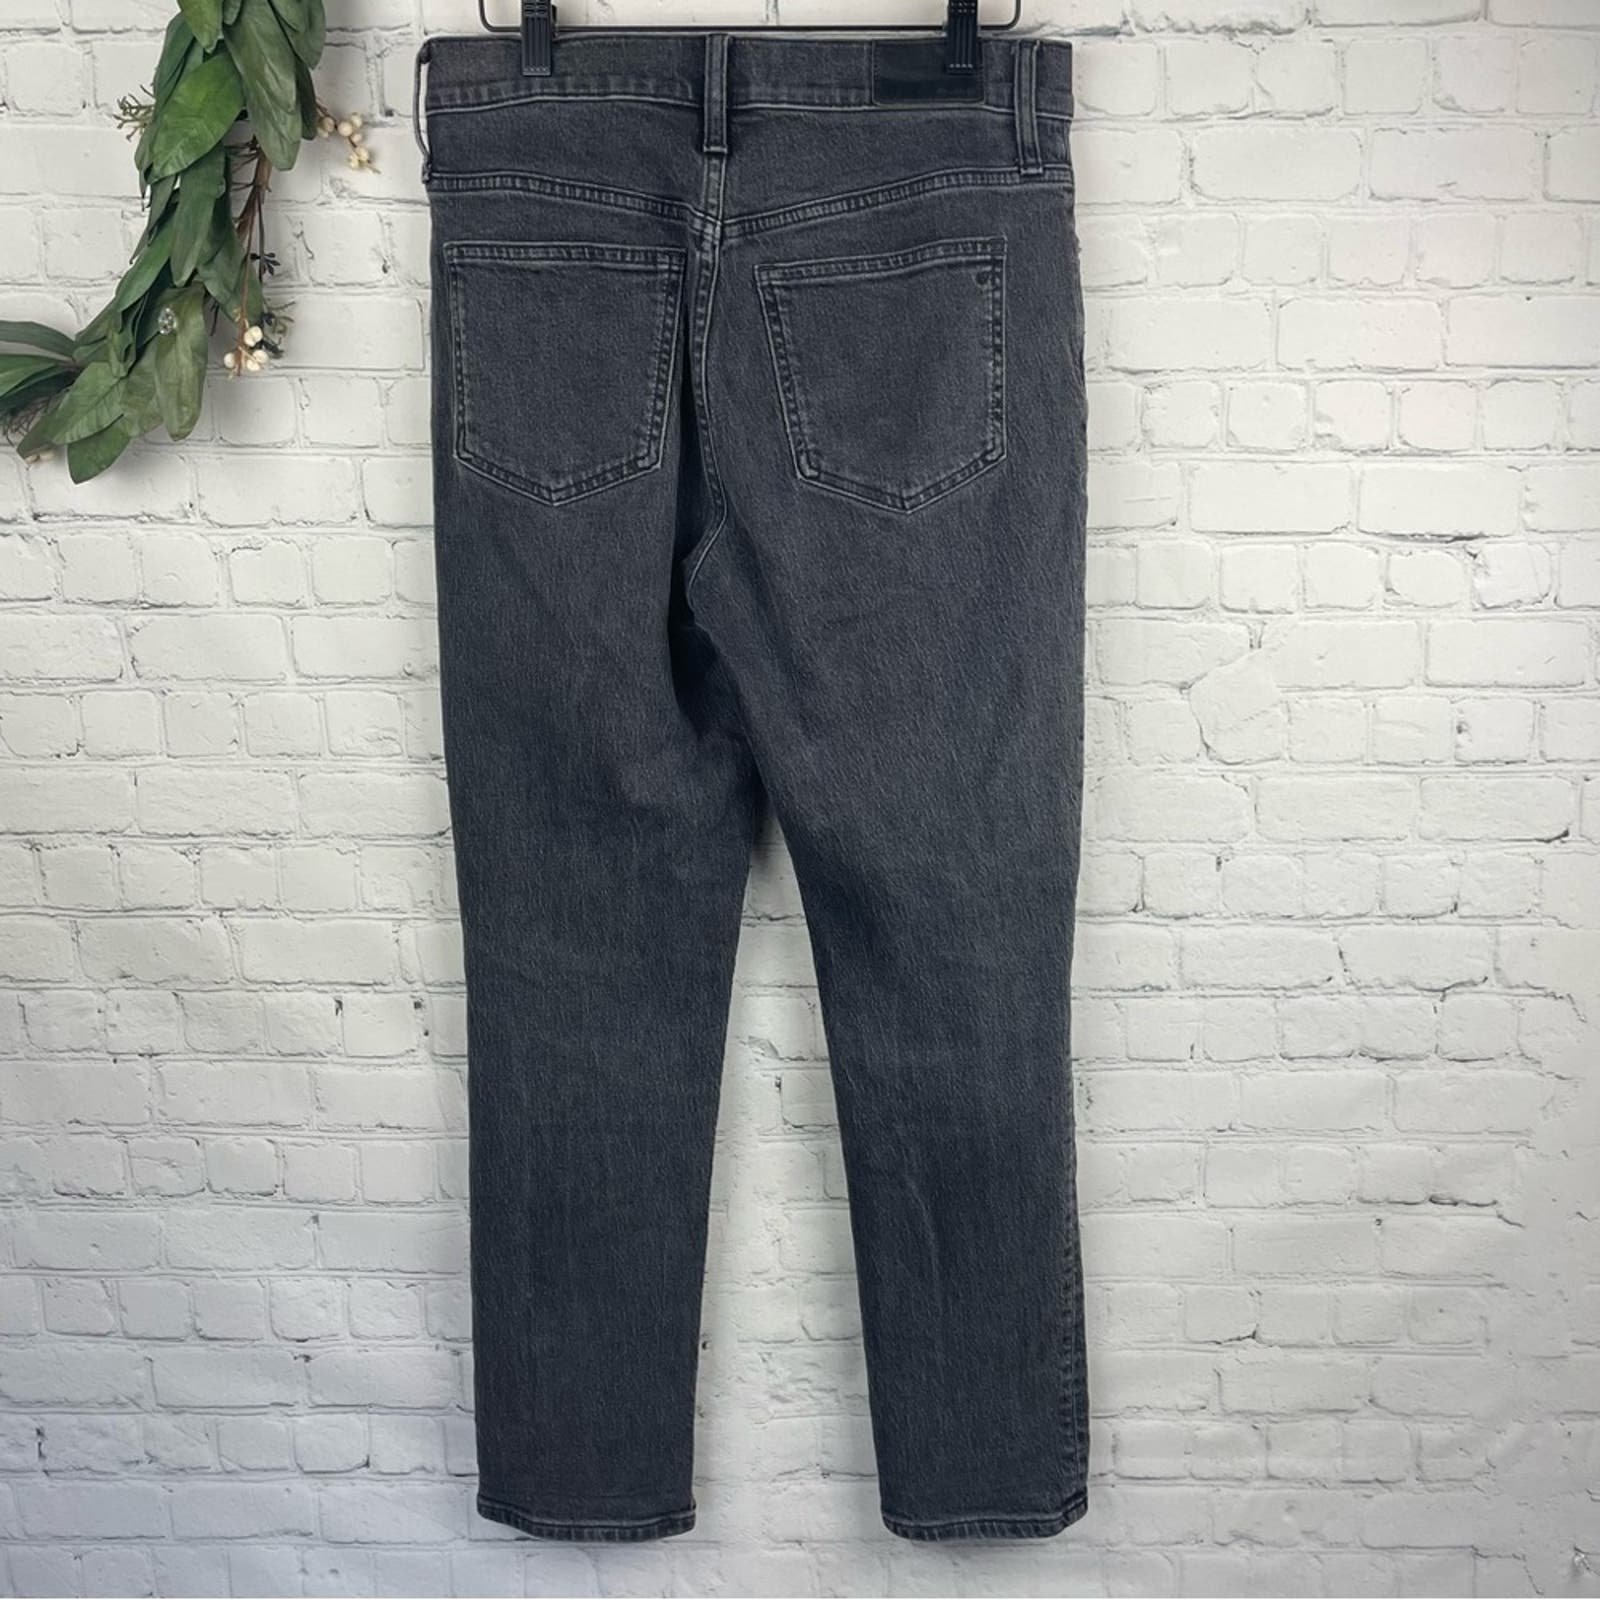 Discounted MADEWELL The Perfect Vintage Jean MD711 Lunar Wash Size 27 mG0jH1Vif US Sale